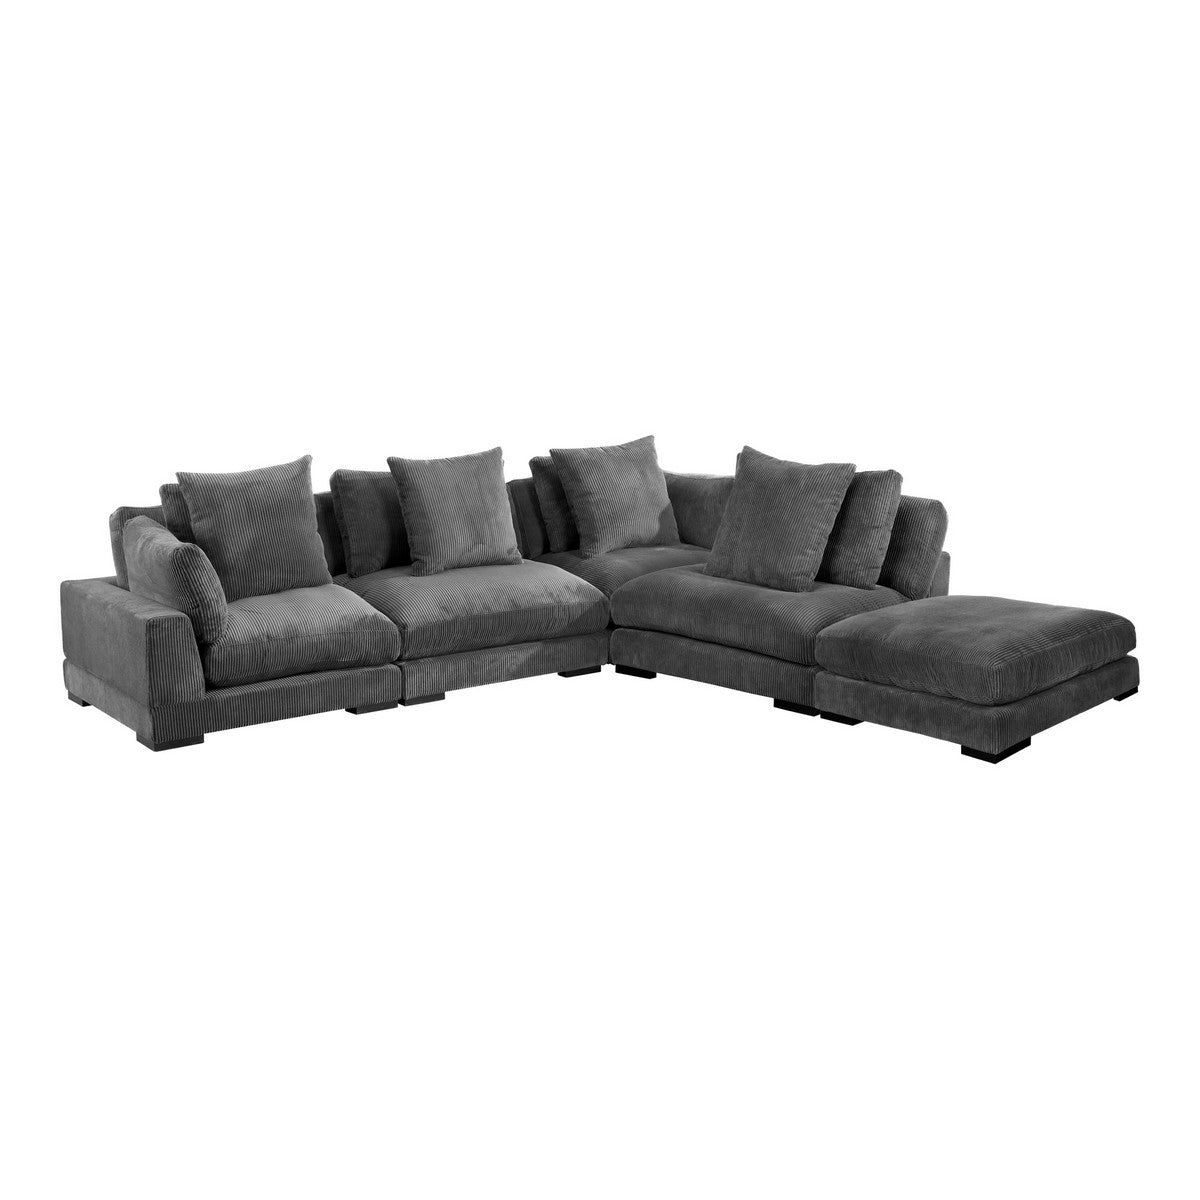 Moe's Home Collection Tumble Dream Modular Sectional Charcoal - UB-1015-25 - Moe's Home Collection - Extras - Minimal And Modern - 1